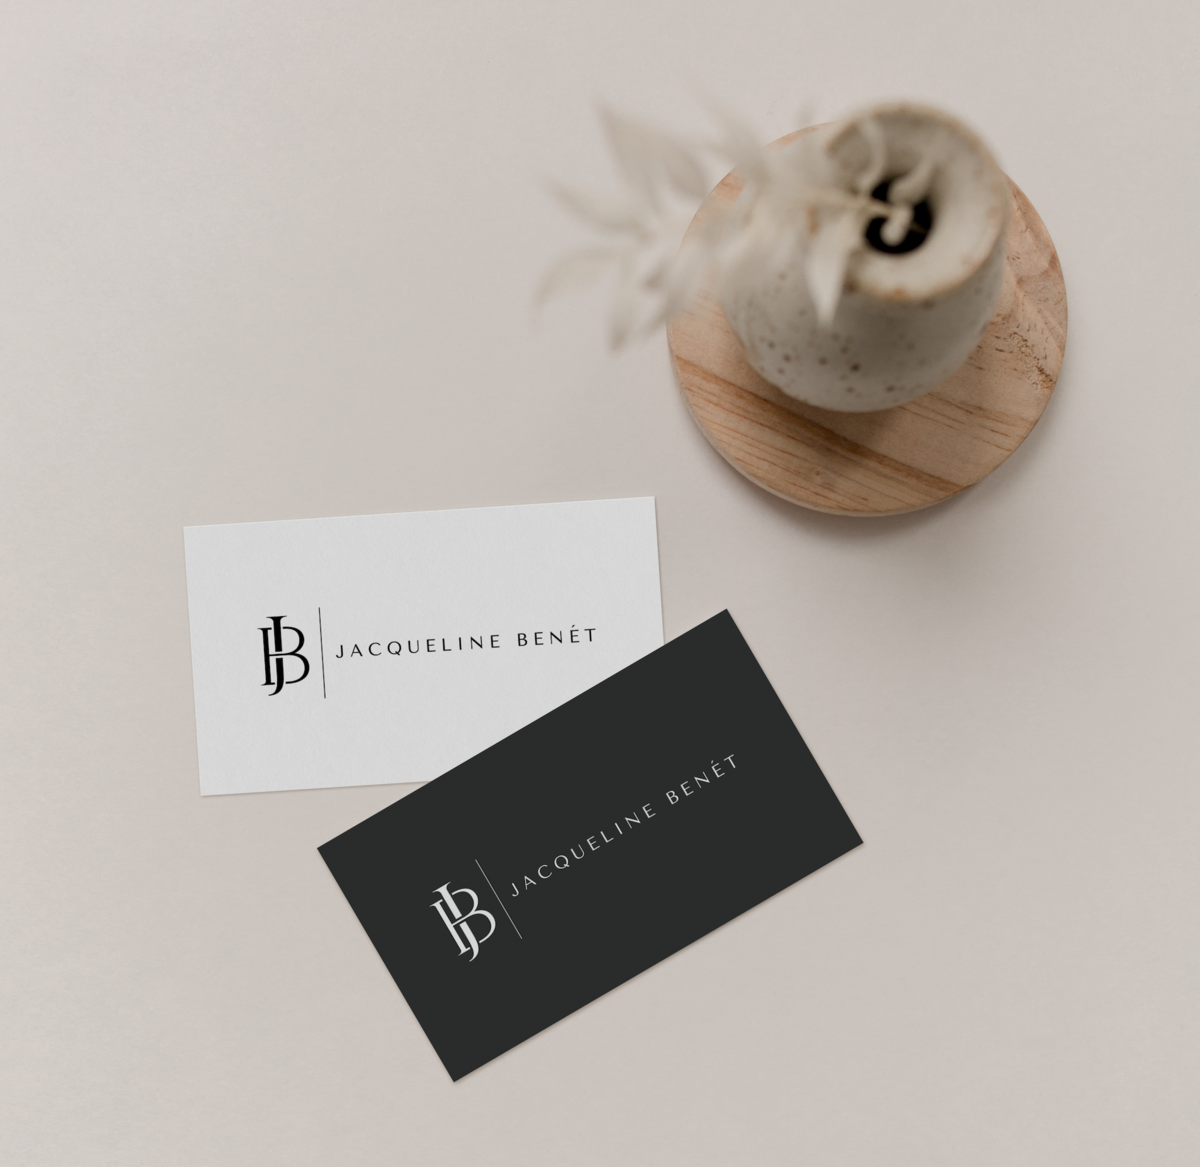 Two business cards, one in white with black lettering and one in black with white lettering displayed againsta marble countertop.